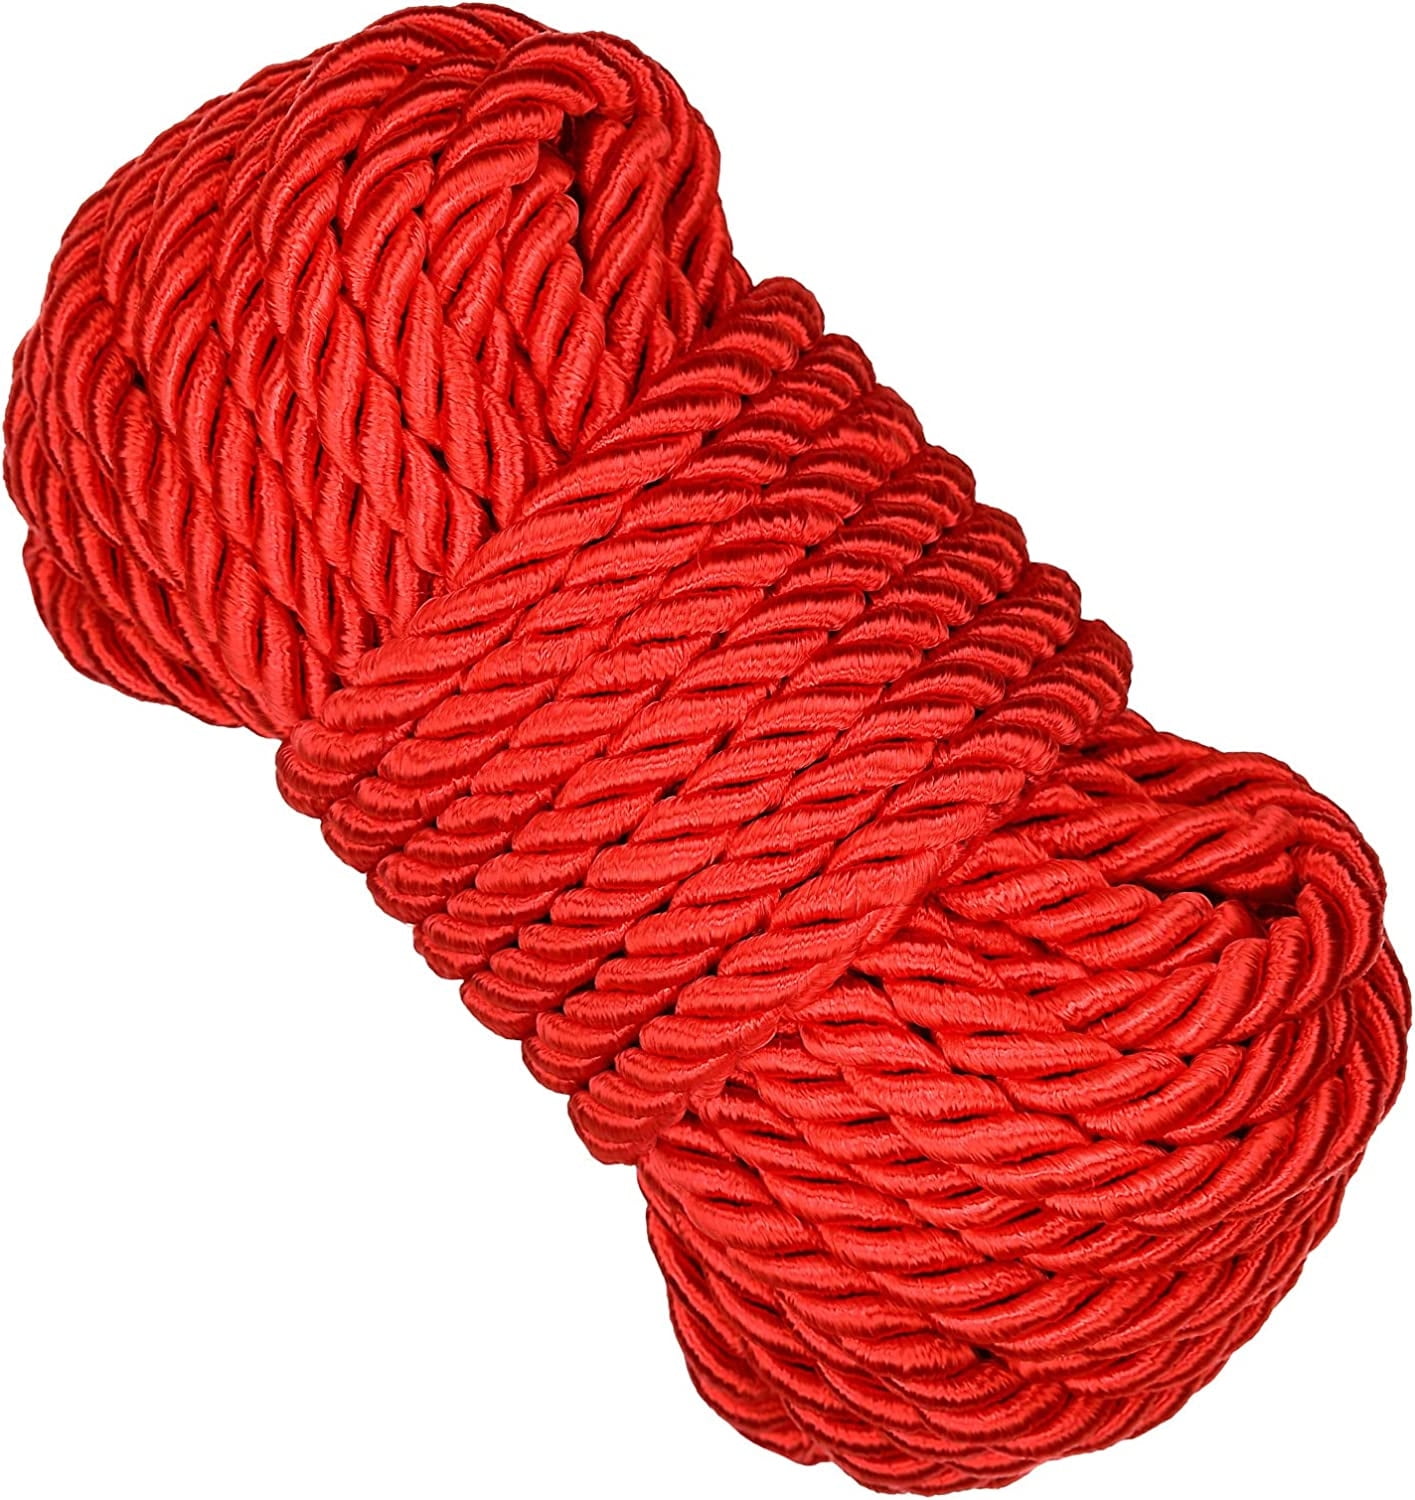 Casewin All Purpose Rope 8 mm 10M - 32 Feet Length Strong Multifunctional  Soft Cotton Rope Natural Twisted Durable Long Ropes(Red)